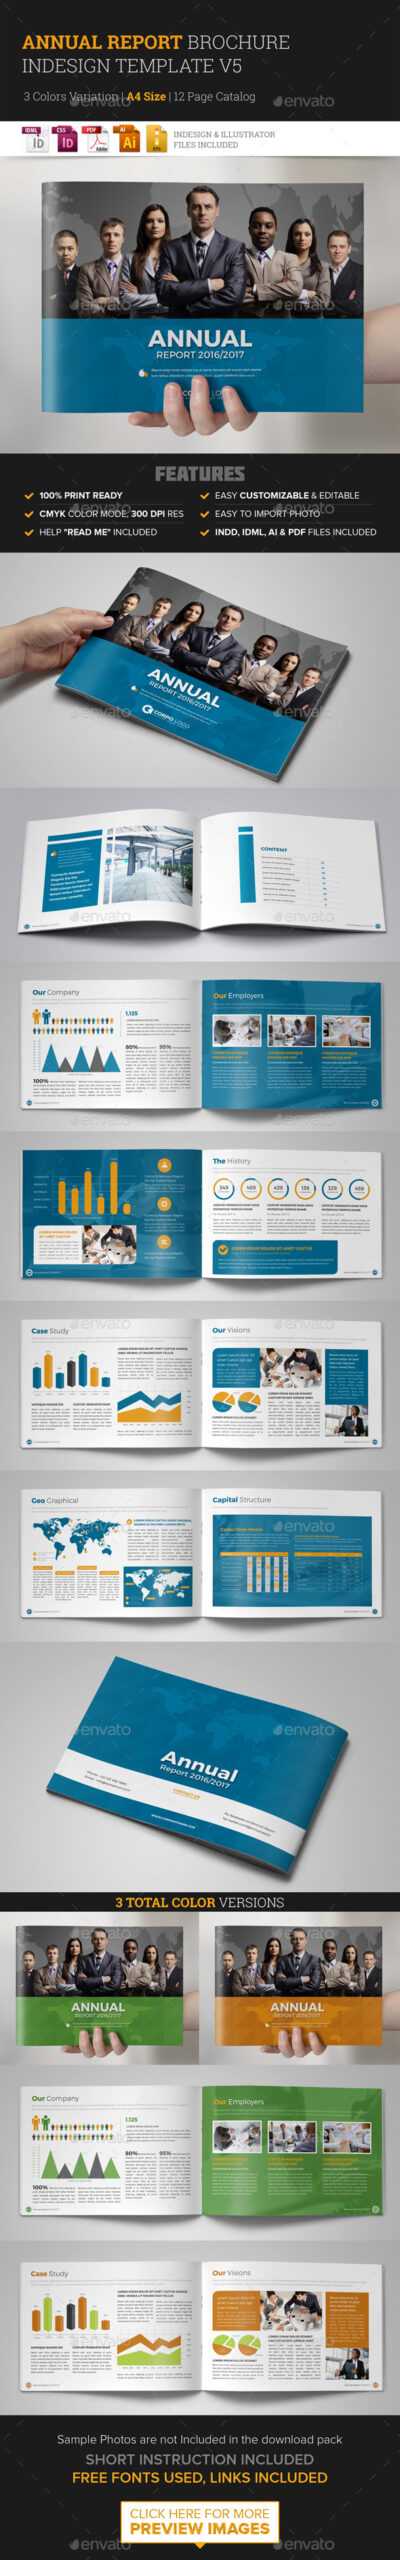 Annual Report Template Indesign Graphics, Designs & Templates Inside Free Indesign Report Templates